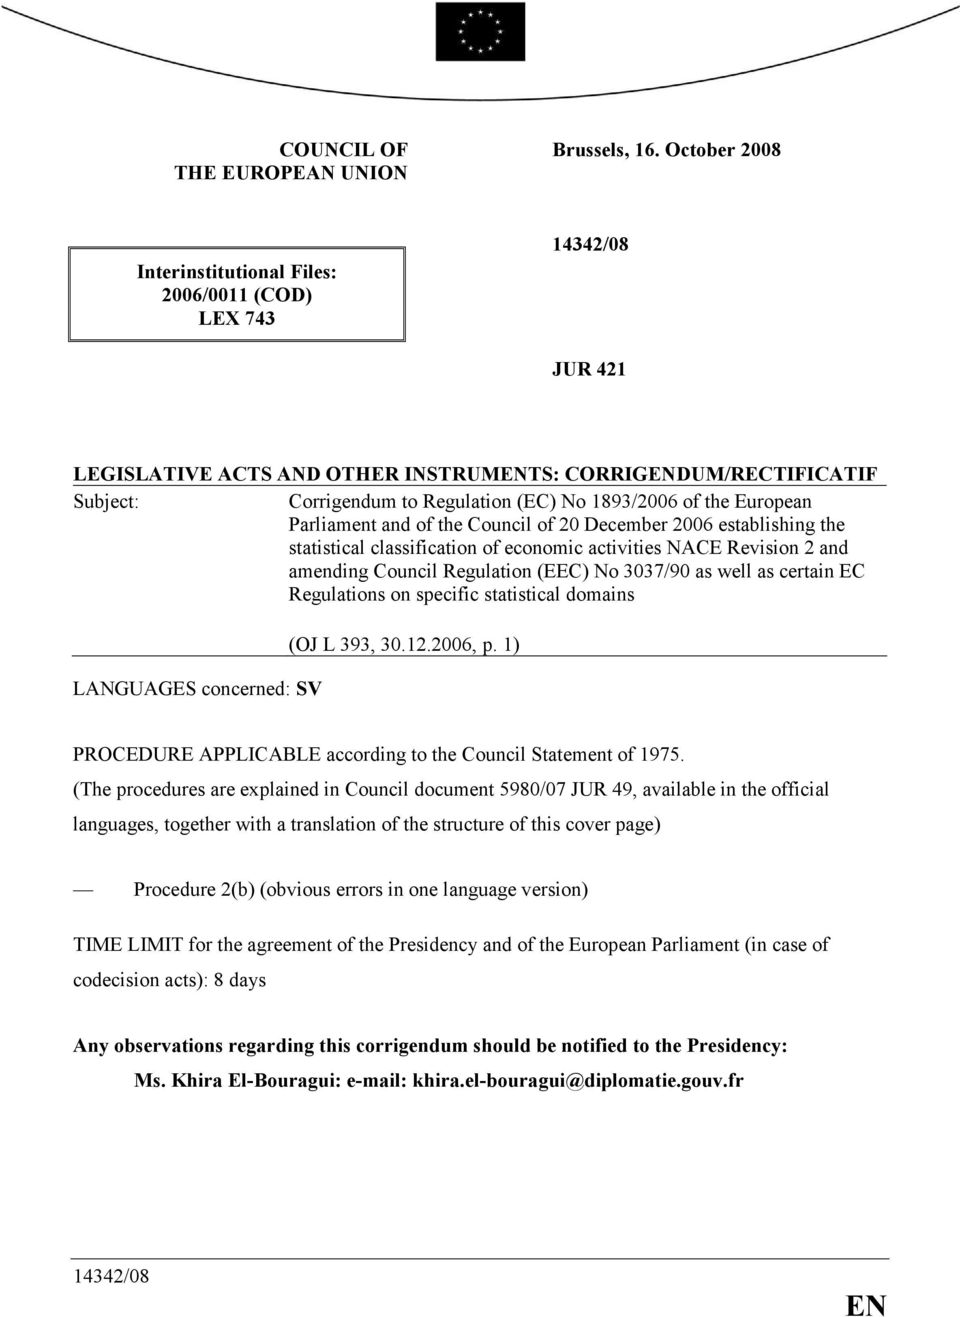 of the European Parliament and of the Council of 20 December 2006 establishing the statistical classification of economic activities NACE Revision 2 and amending Council Regulation (EEC) No 3037/90